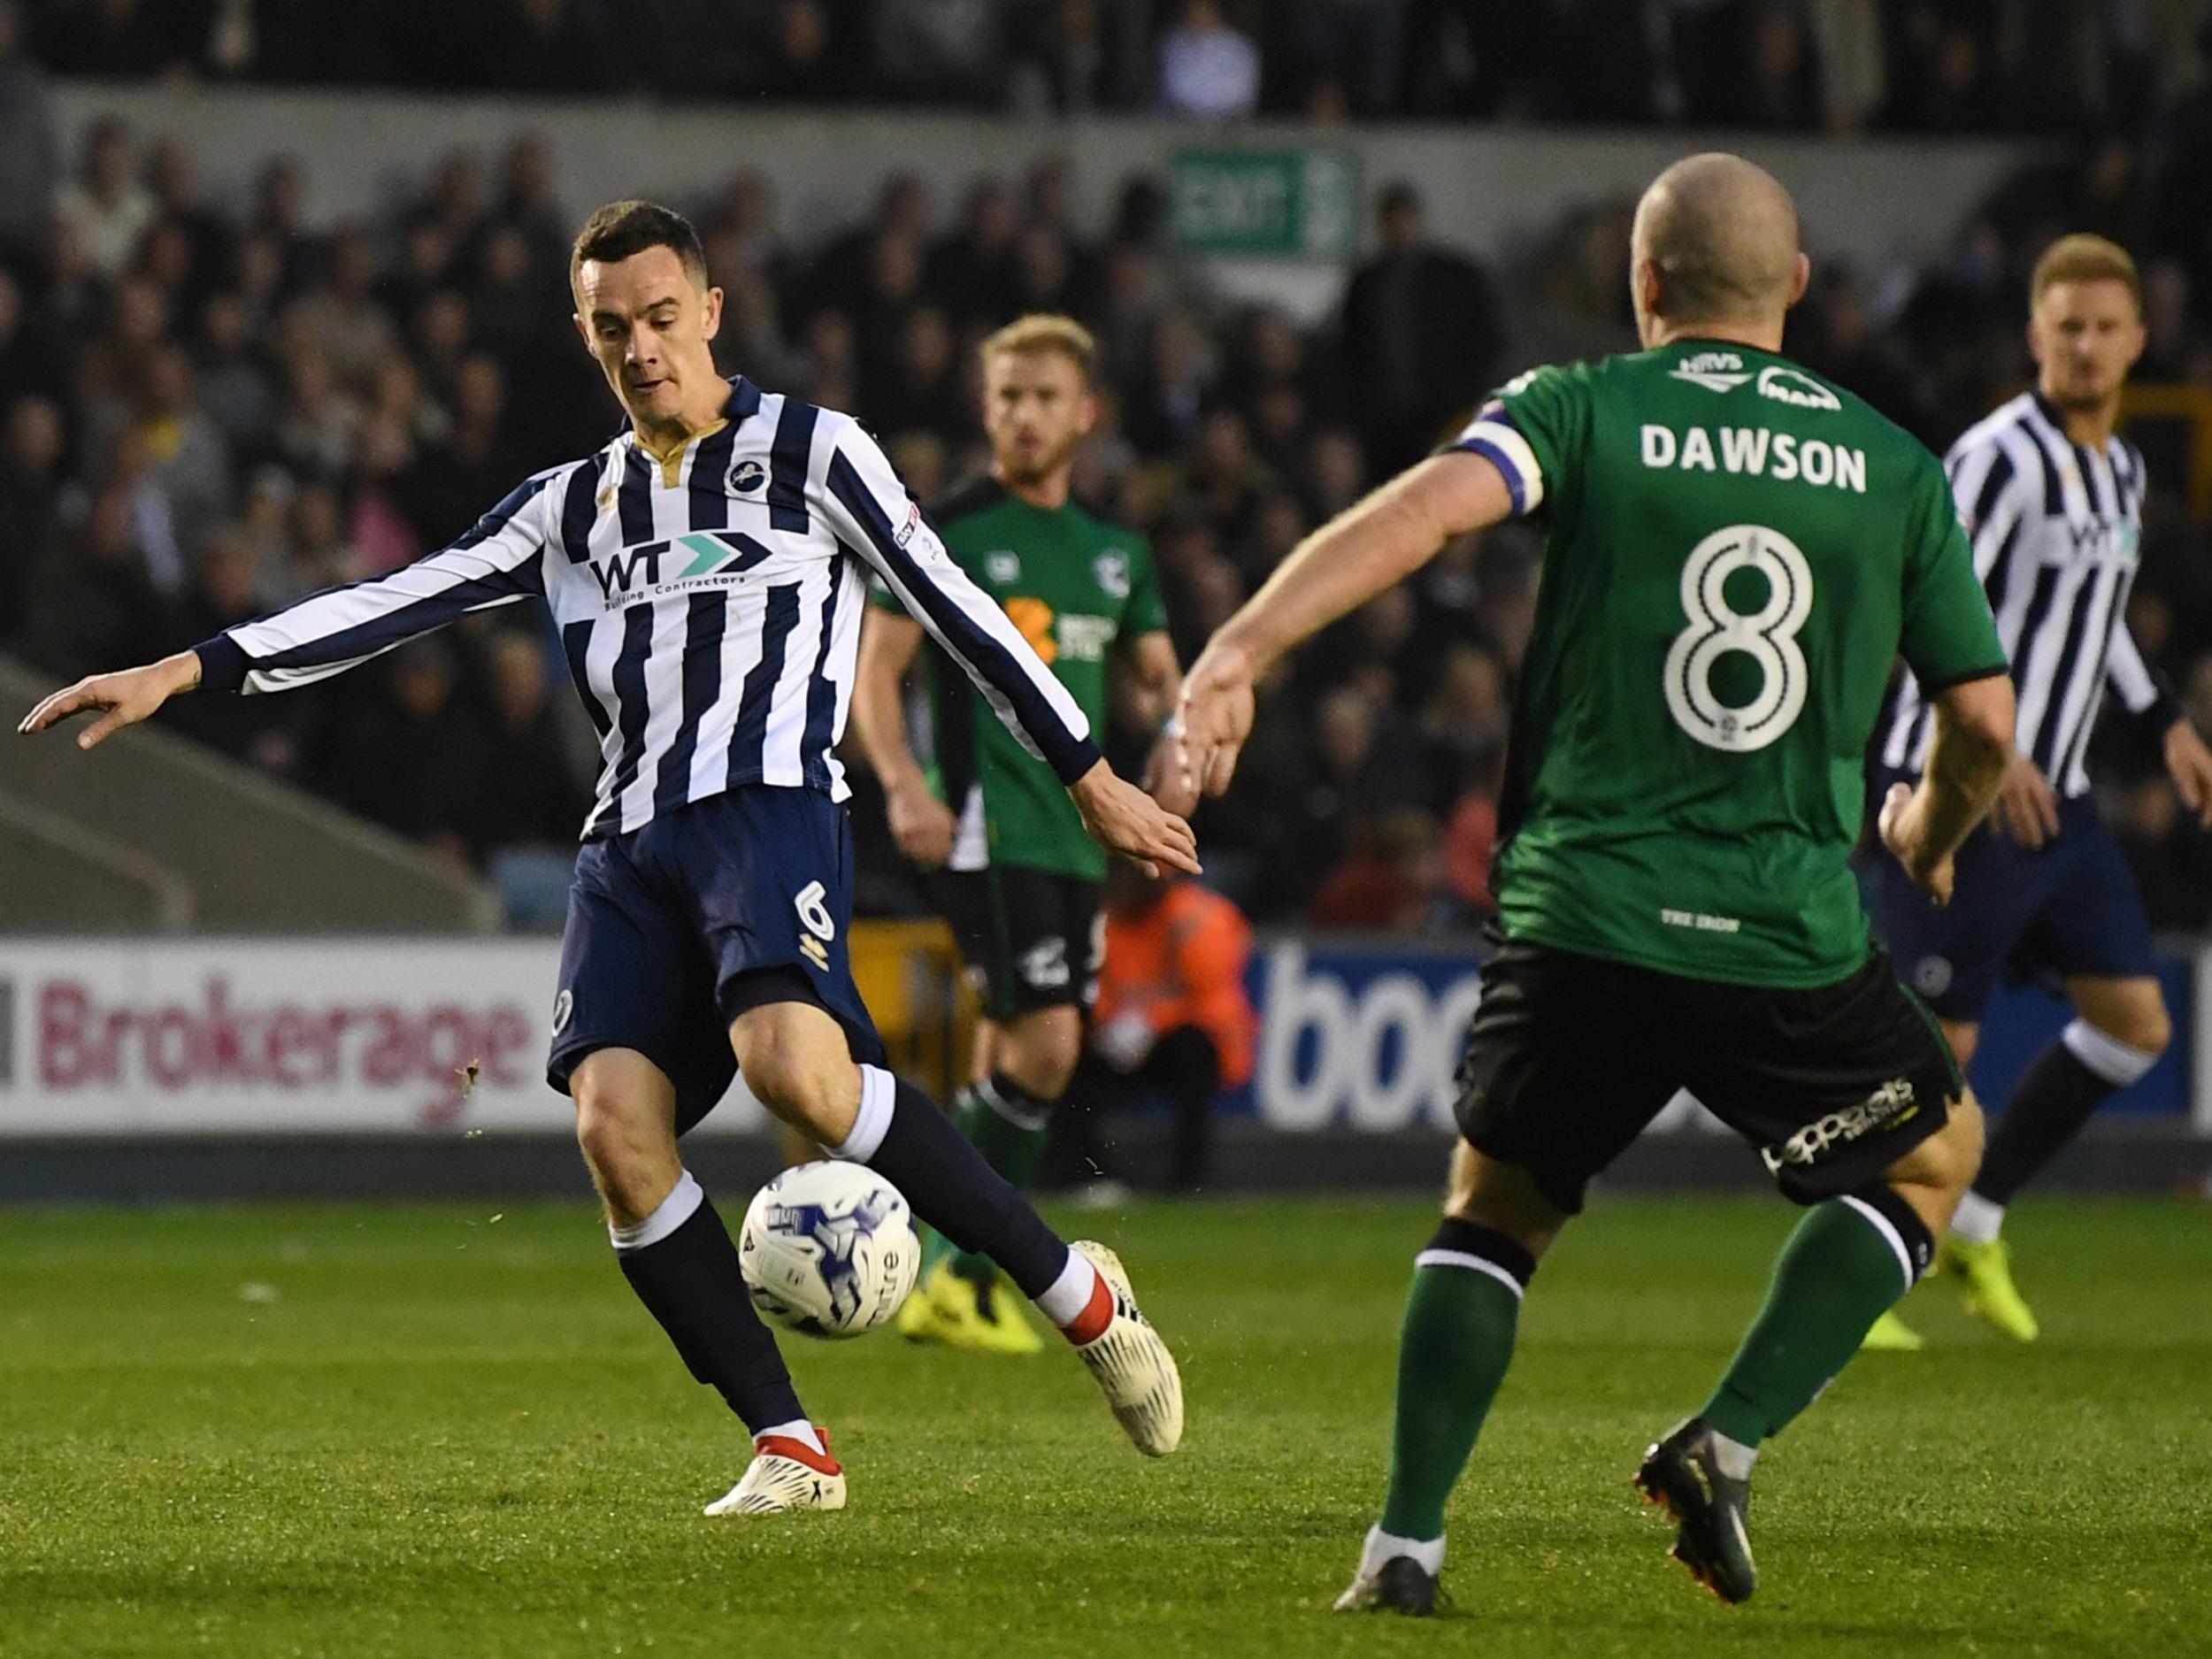 Millwall couldn't find a goal despite intense pressure